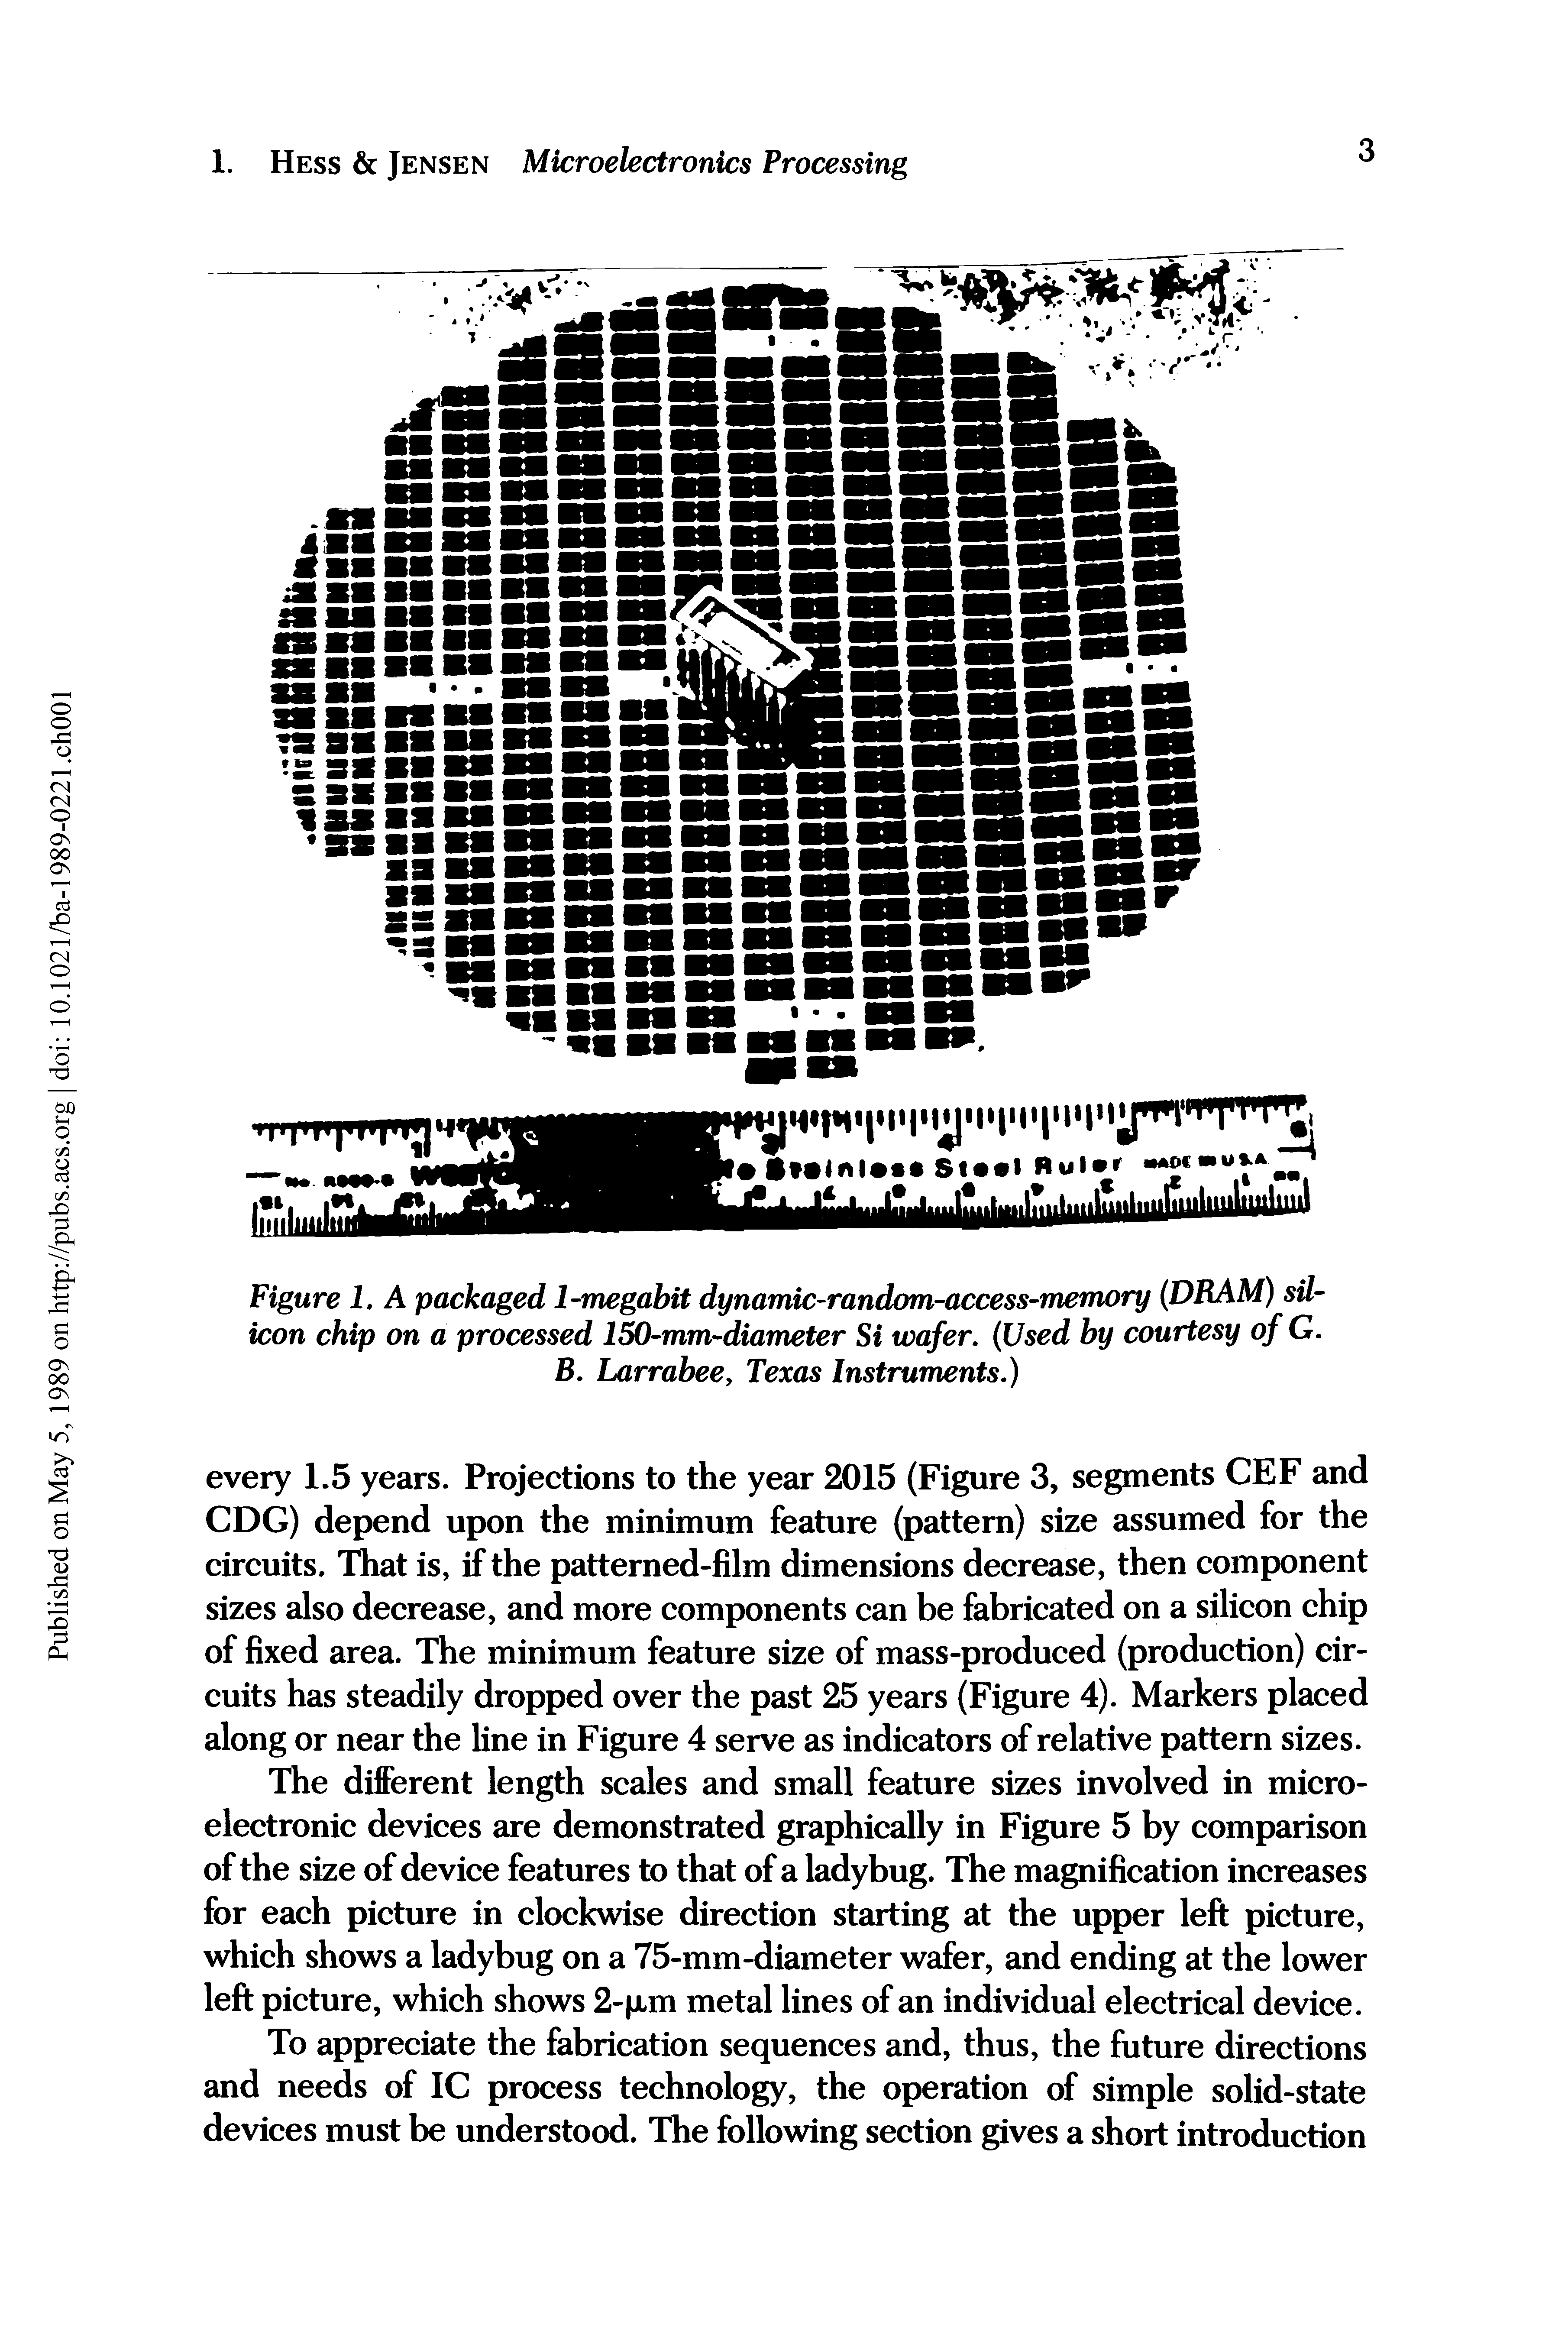 Figure 1. A packaged 1-megabit dynamic-random-access-memory (DRAM) silicon chip on a processed 150-mm-diameter Si wafer. (Used by courtesy of G. B. Larrabee, Texas Instruments.)...